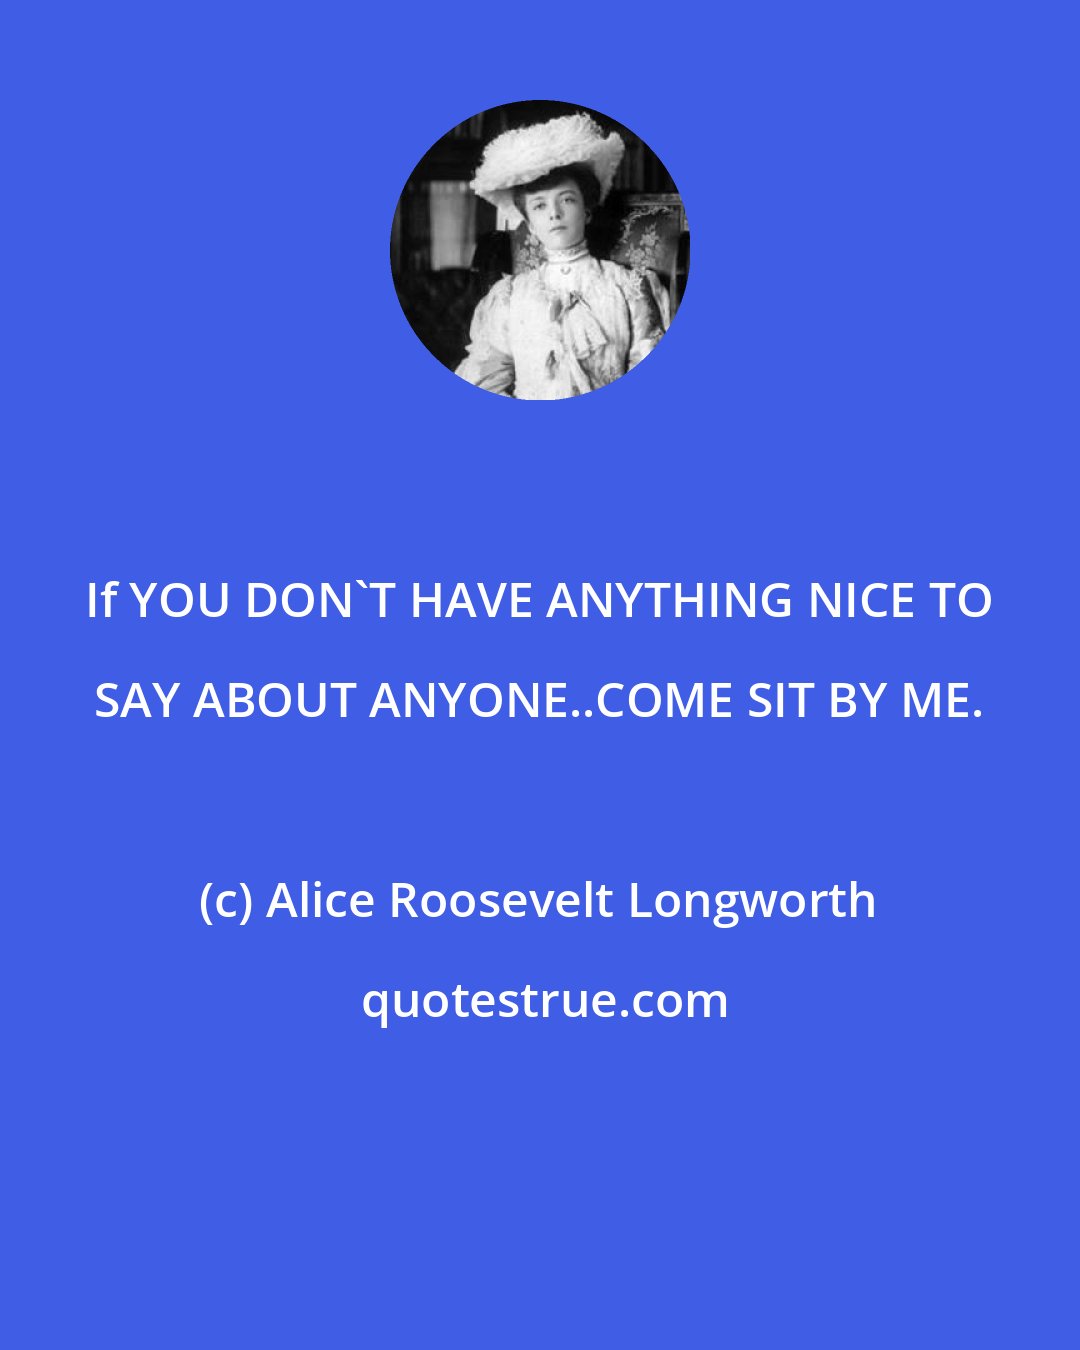 Alice Roosevelt Longworth: If YOU DON'T HAVE ANYTHING NICE TO SAY ABOUT ANYONE..COME SIT BY ME.